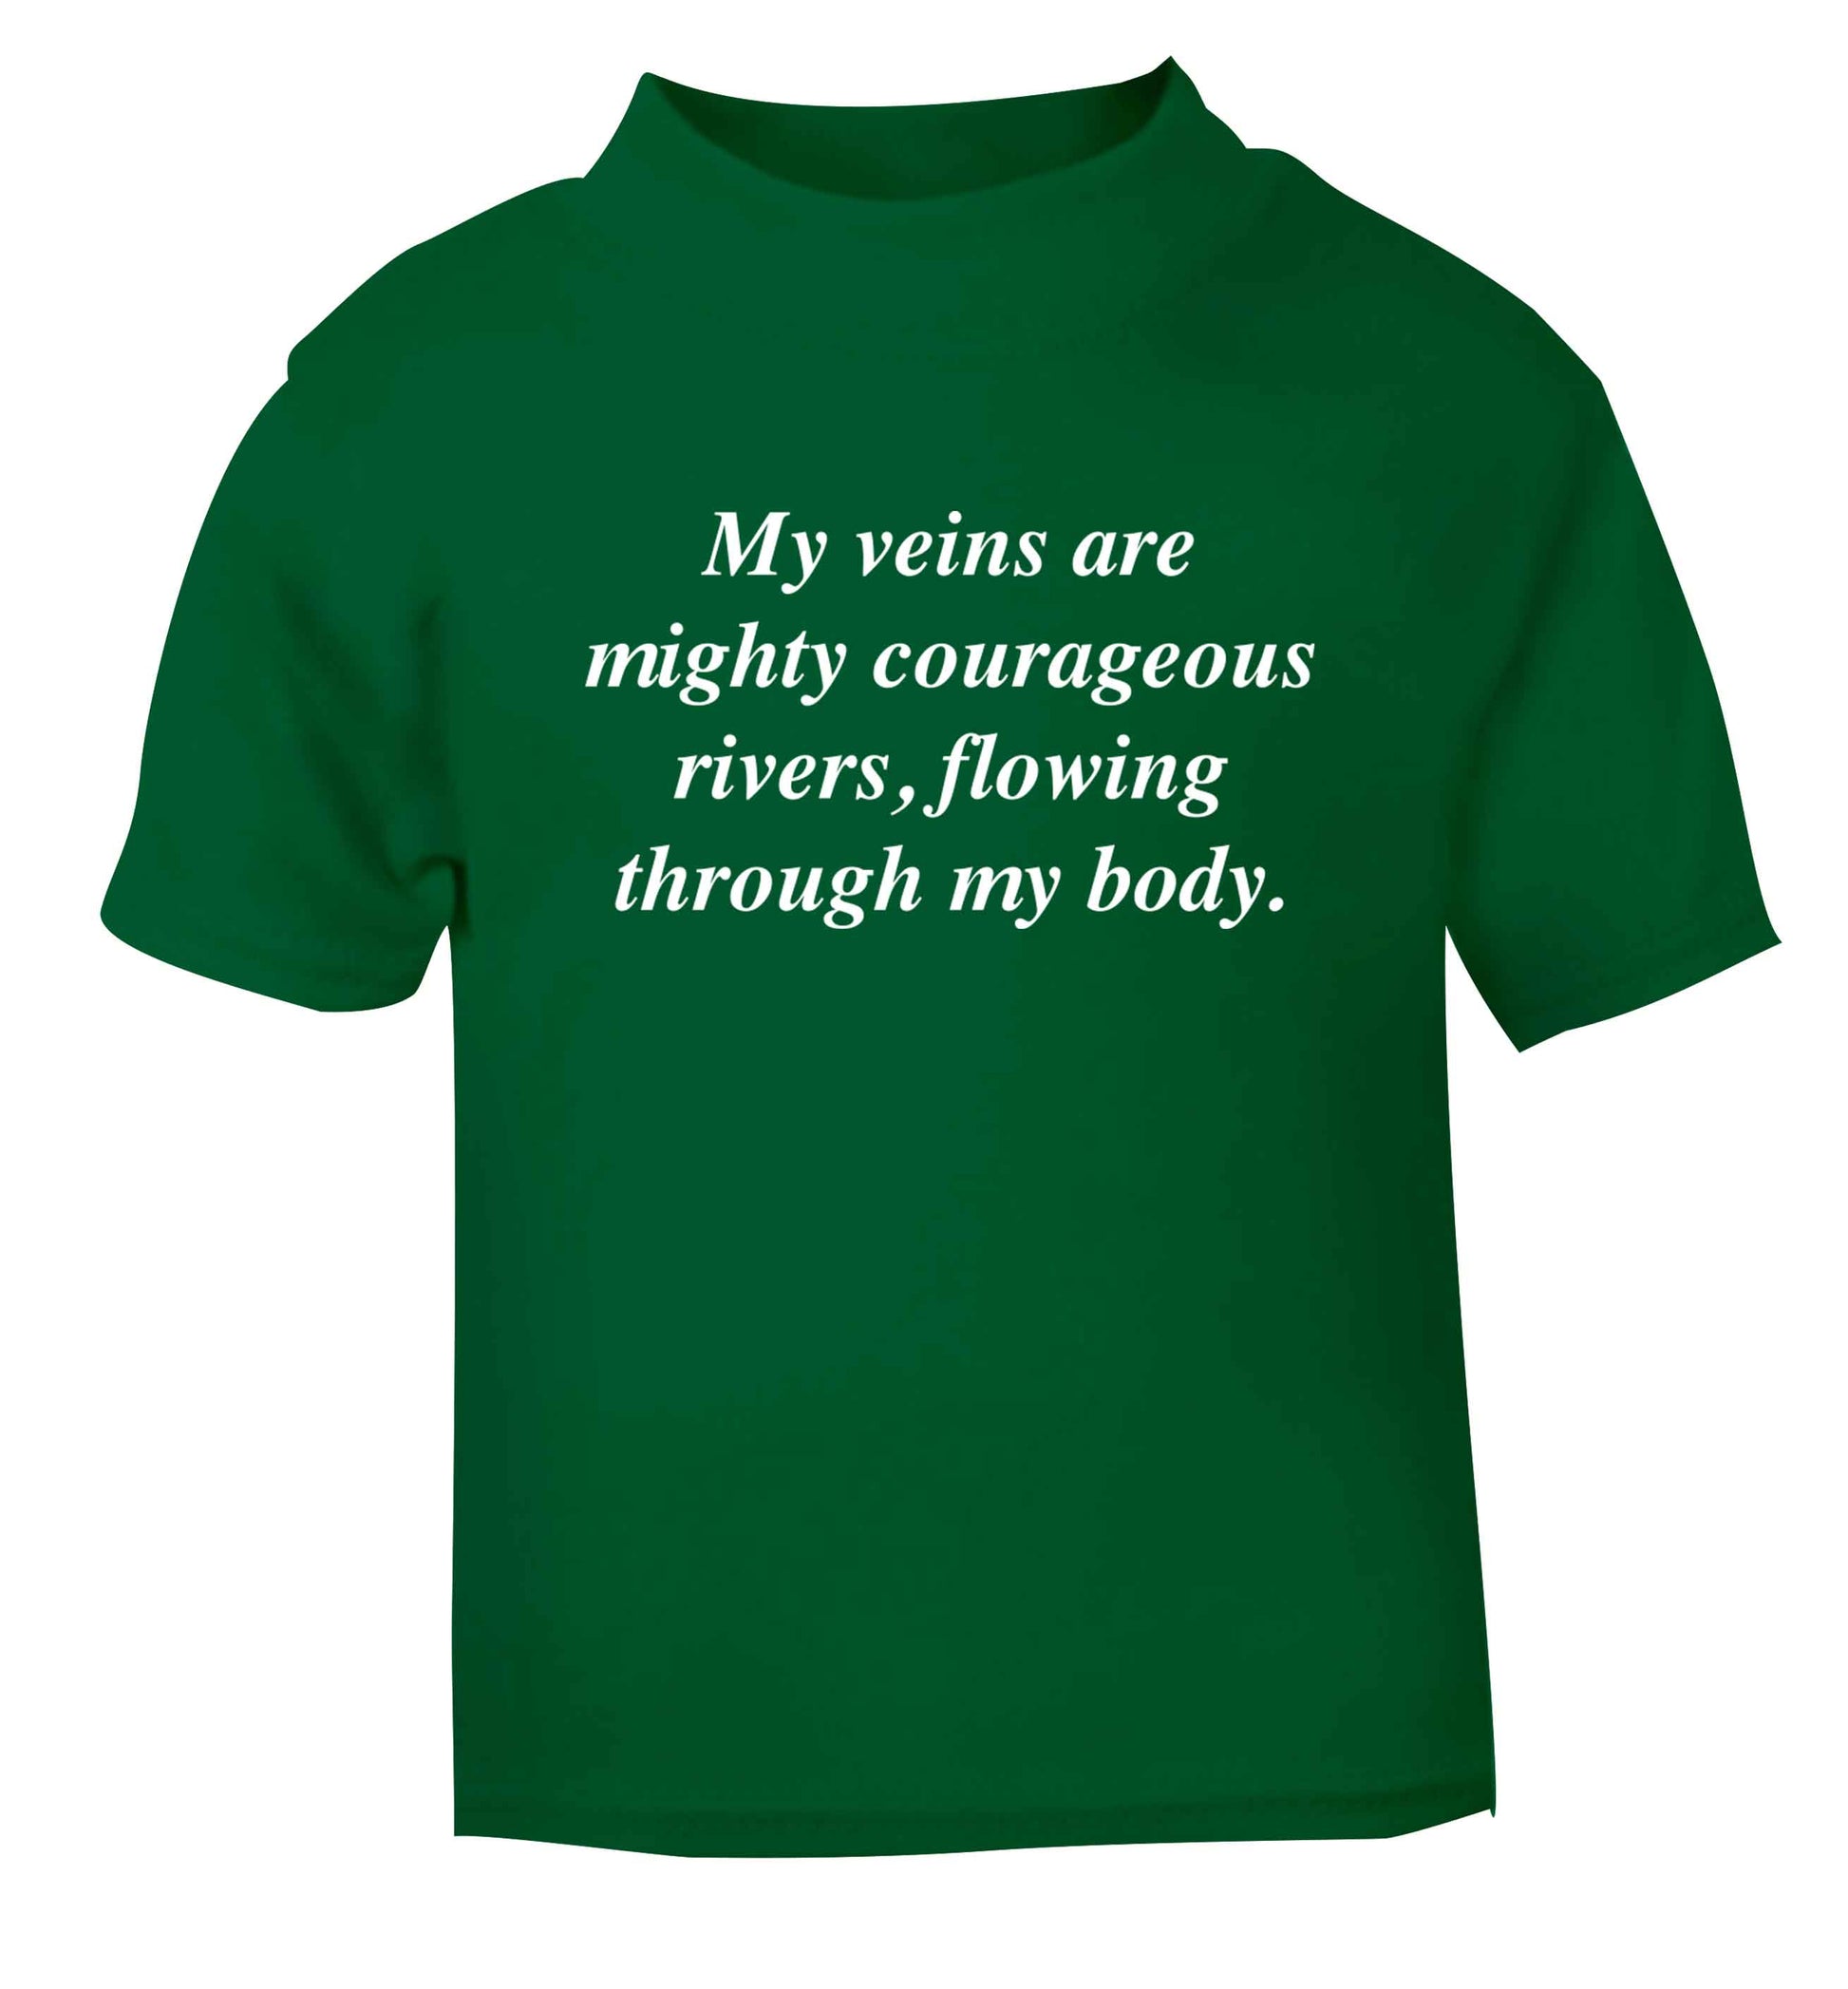 My veins are mighty courageous rivers, flowing through my body green baby toddler Tshirt 2 Years